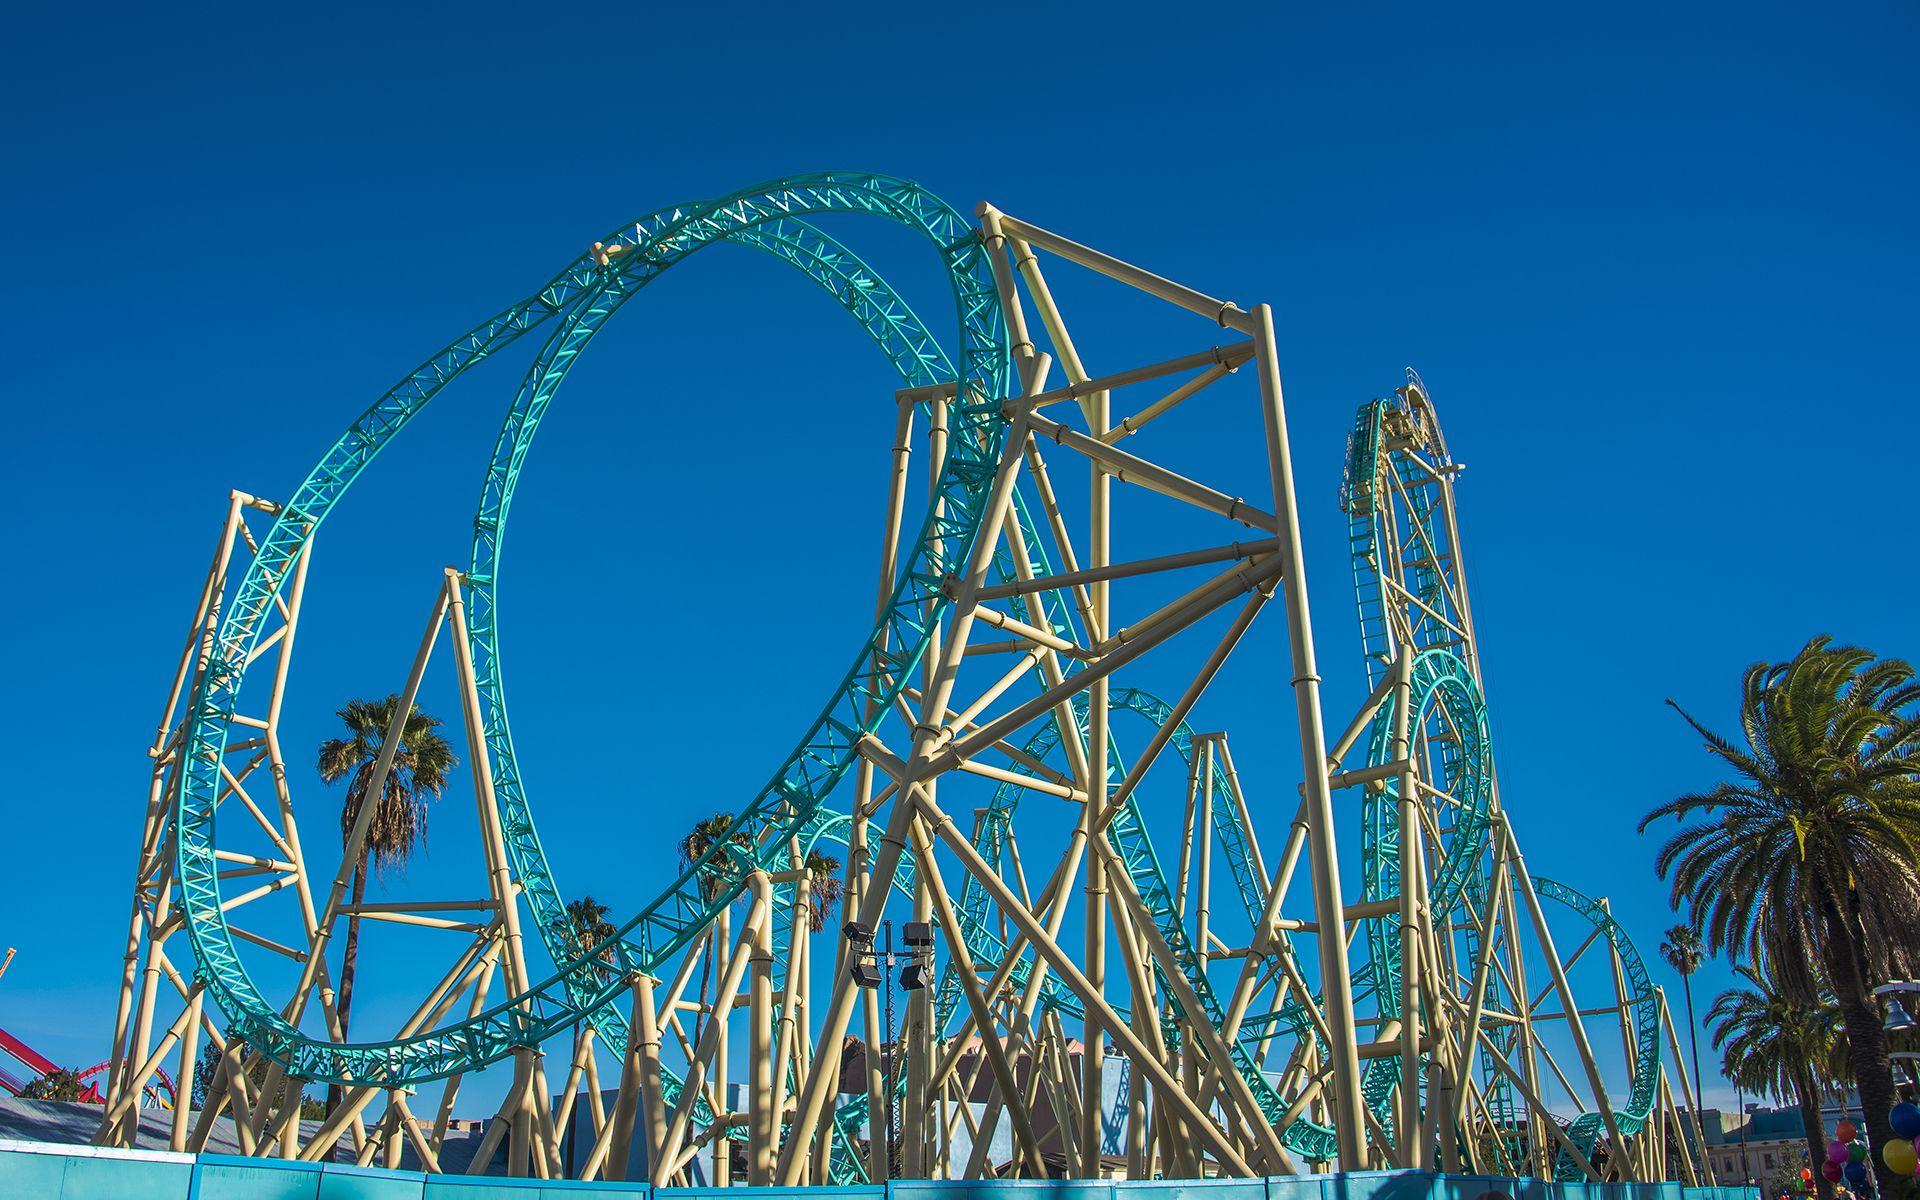 Knott's Berry Farm Update: Hangtime Track Completed